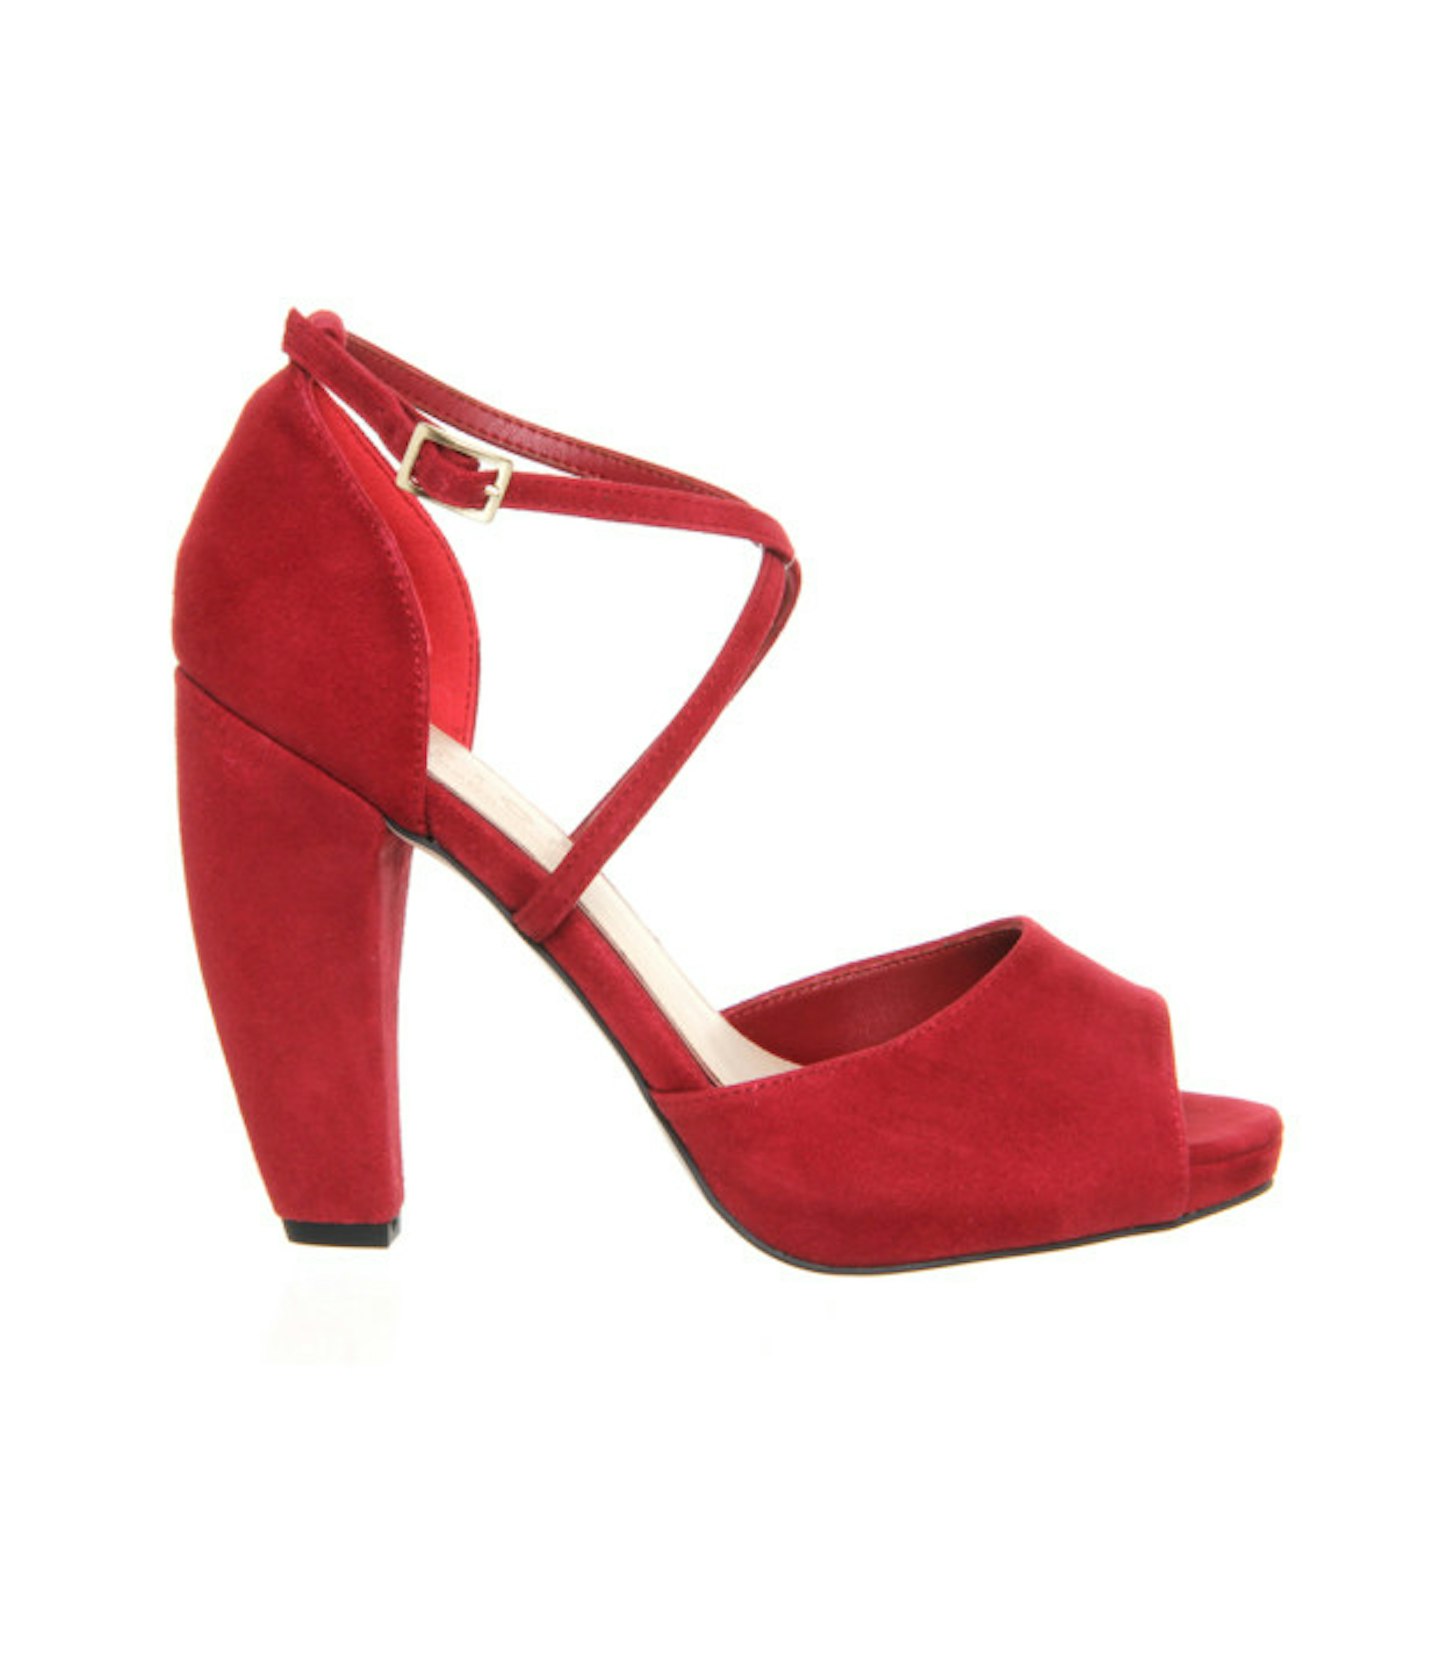 six-o-clock-shoes-office-red-suede-banana-heels